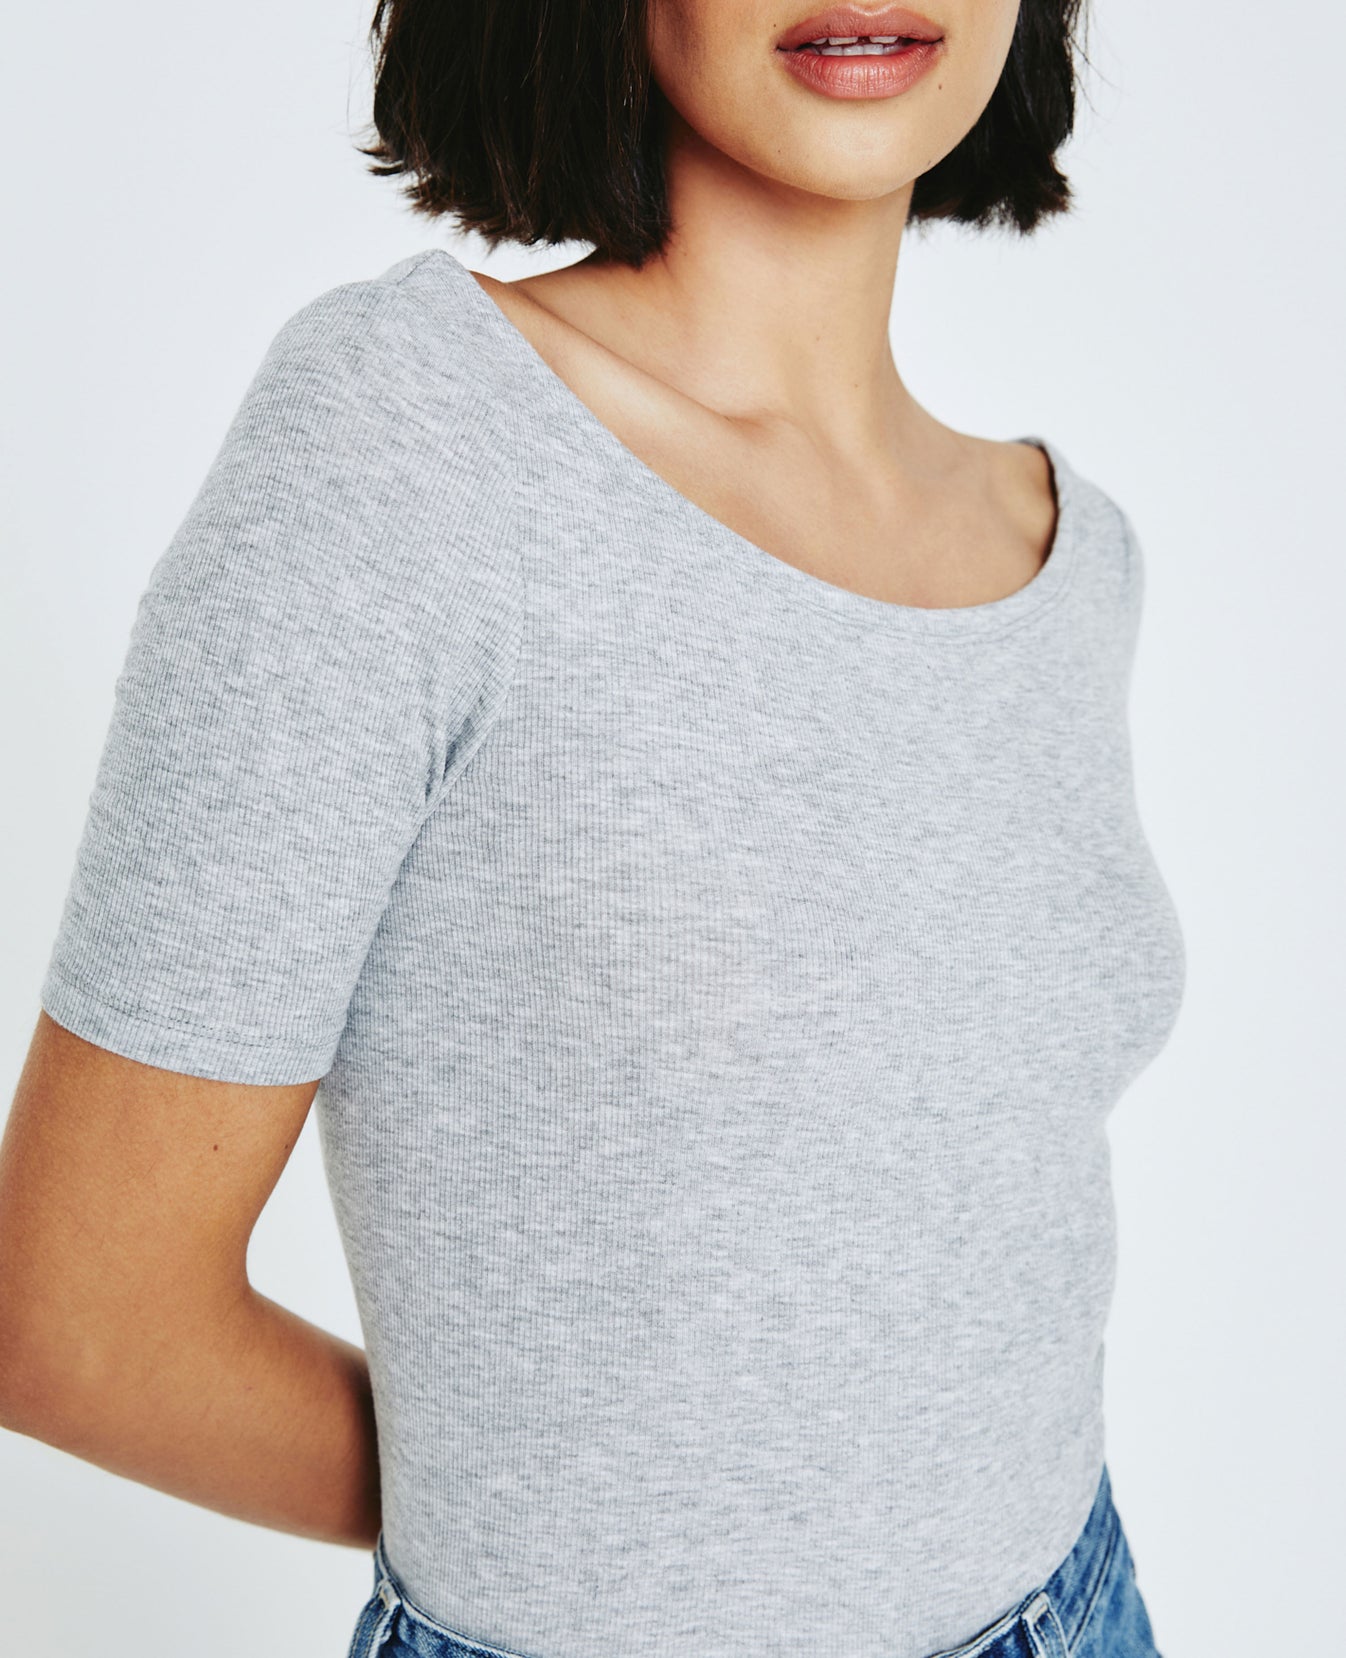 Didion Ballet Neck Tee Heather Grey Ribbed Knit Collection Women Tops Photo 3